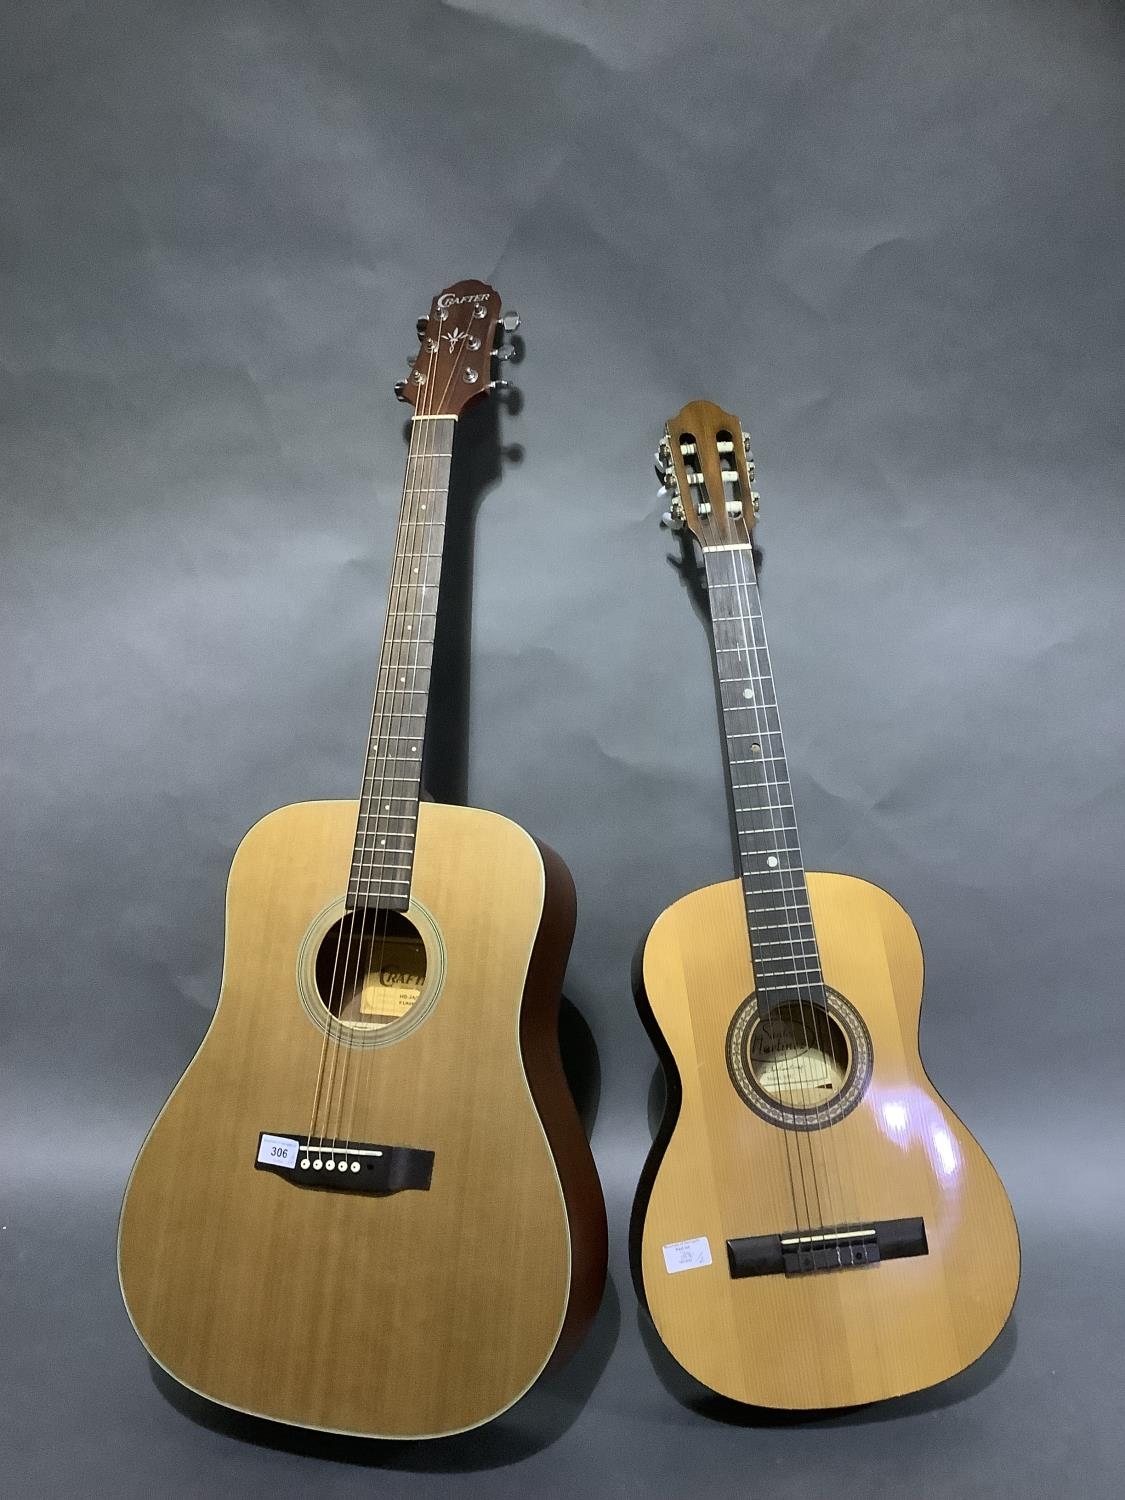 A Crafter silver series acoustic guitar and a smaller acoustic guitar by Santos Martinez model SM2